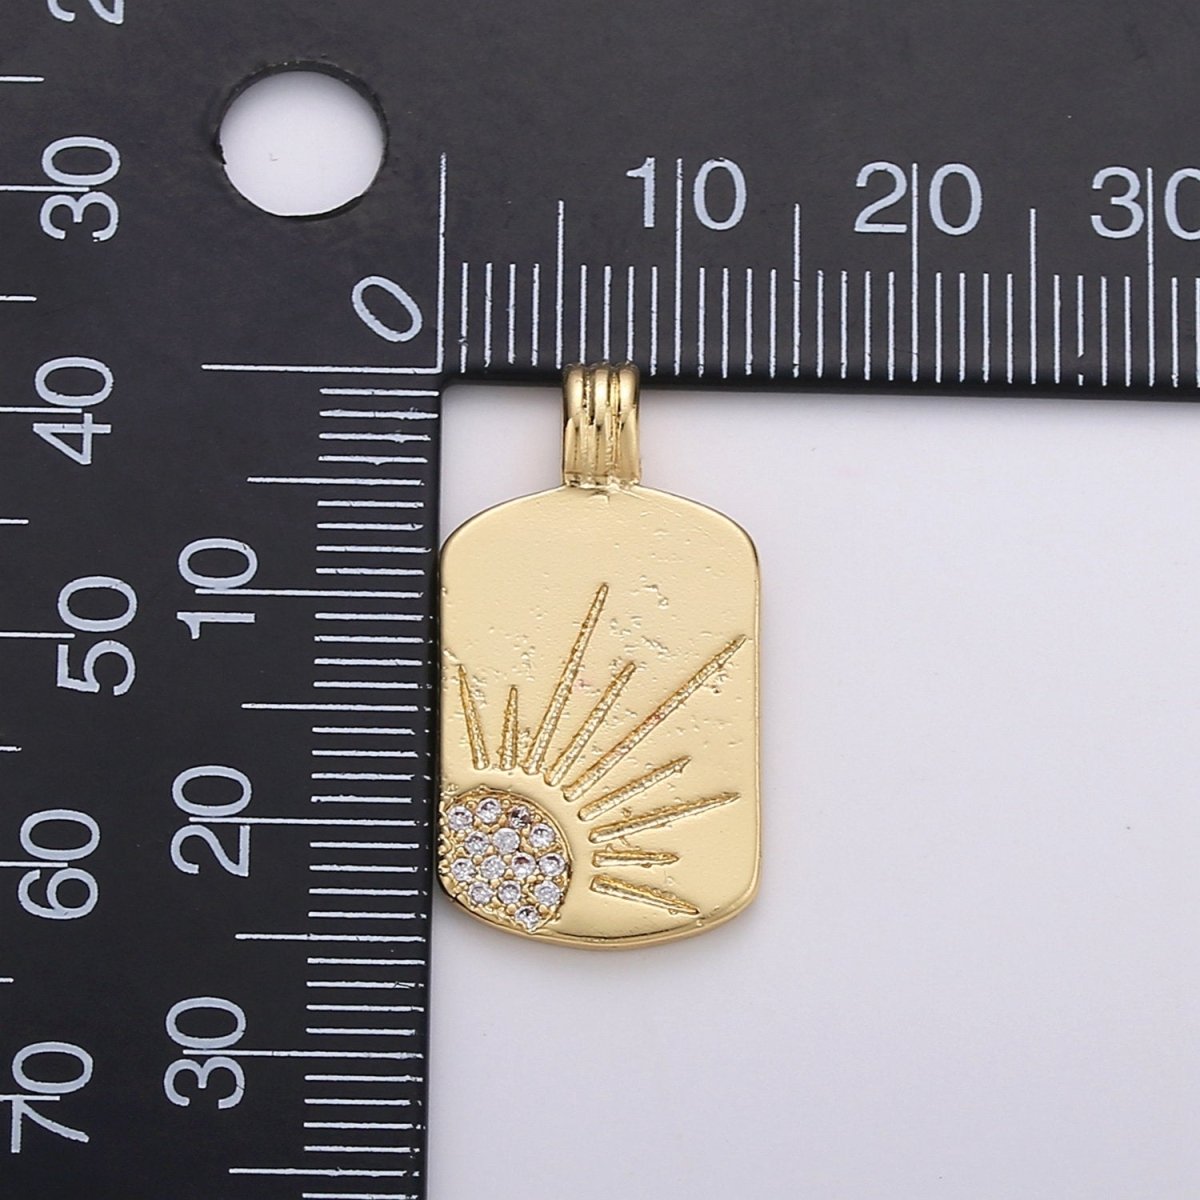 Dainty 14k Gold Filled Tag Pendant Sunrise Charm - Gold Sun Charm, Cubic Sun rays pendant, Celstial Jewelry for Necklace Component Supply I-706 - DLUXCA